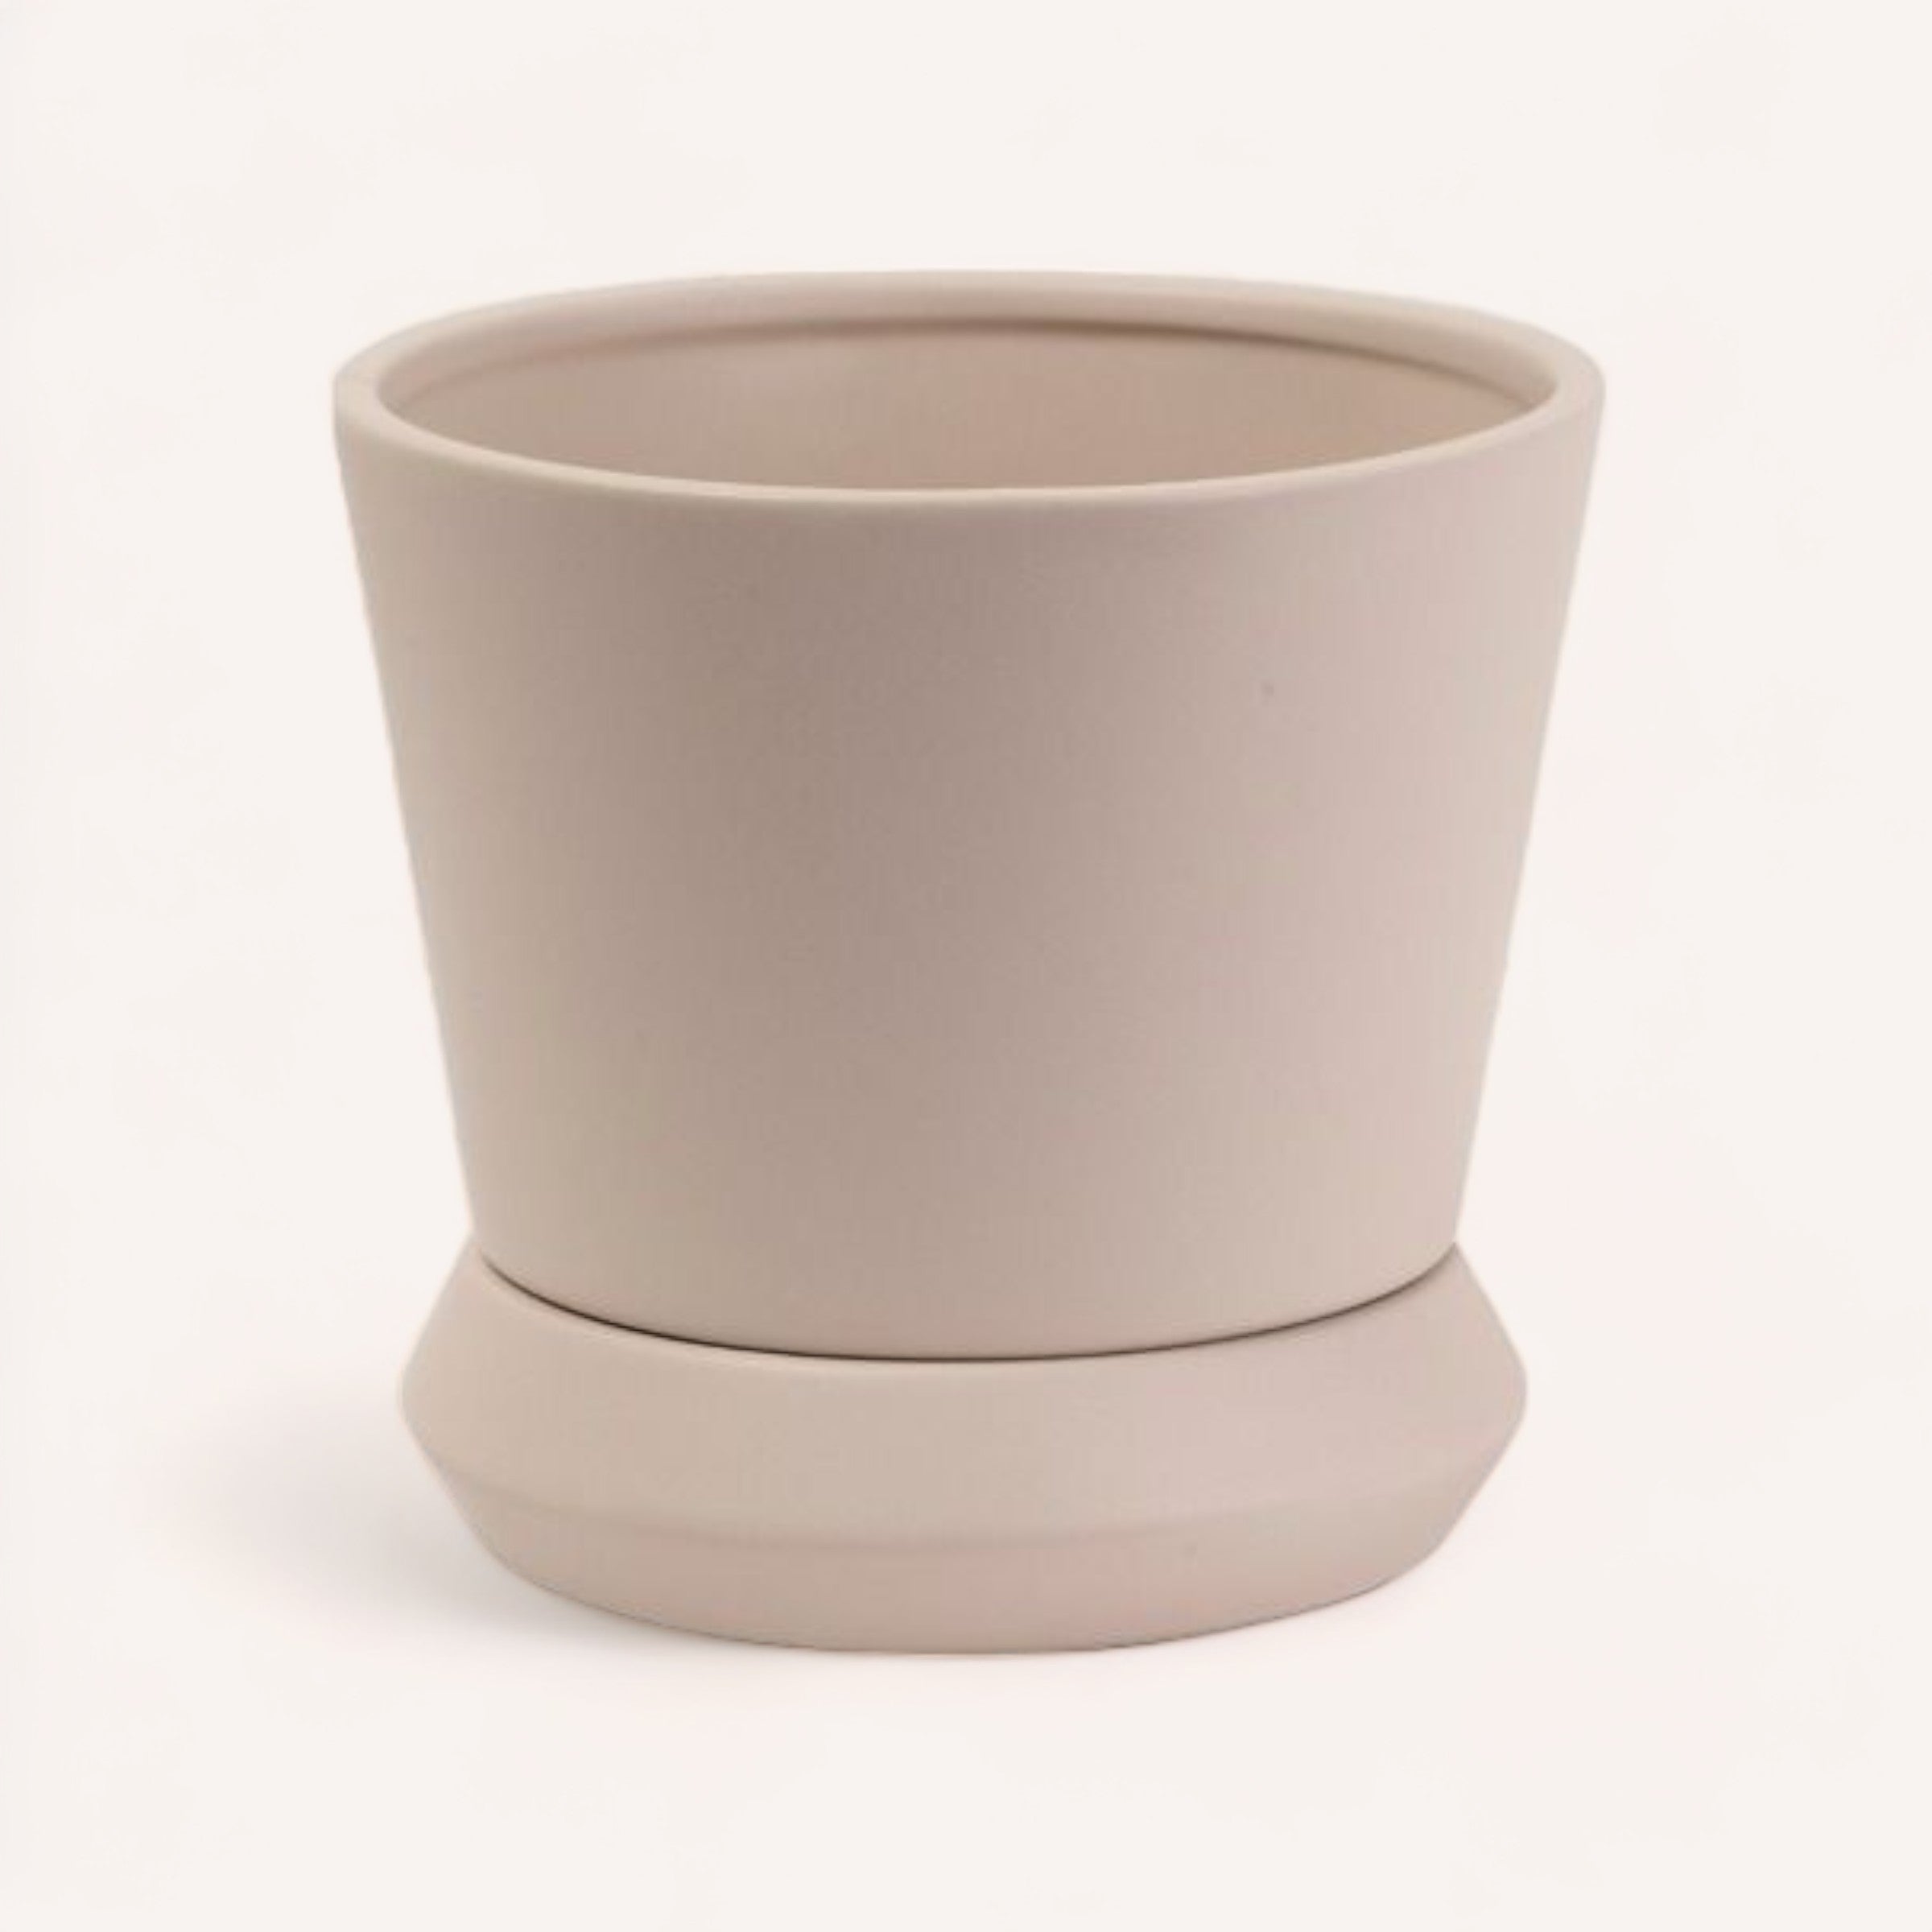 Sentence with replaced product and brand name: Simple beige Hamburg Planter by PottedNZ with a matching saucer and drainage hole on a white background.